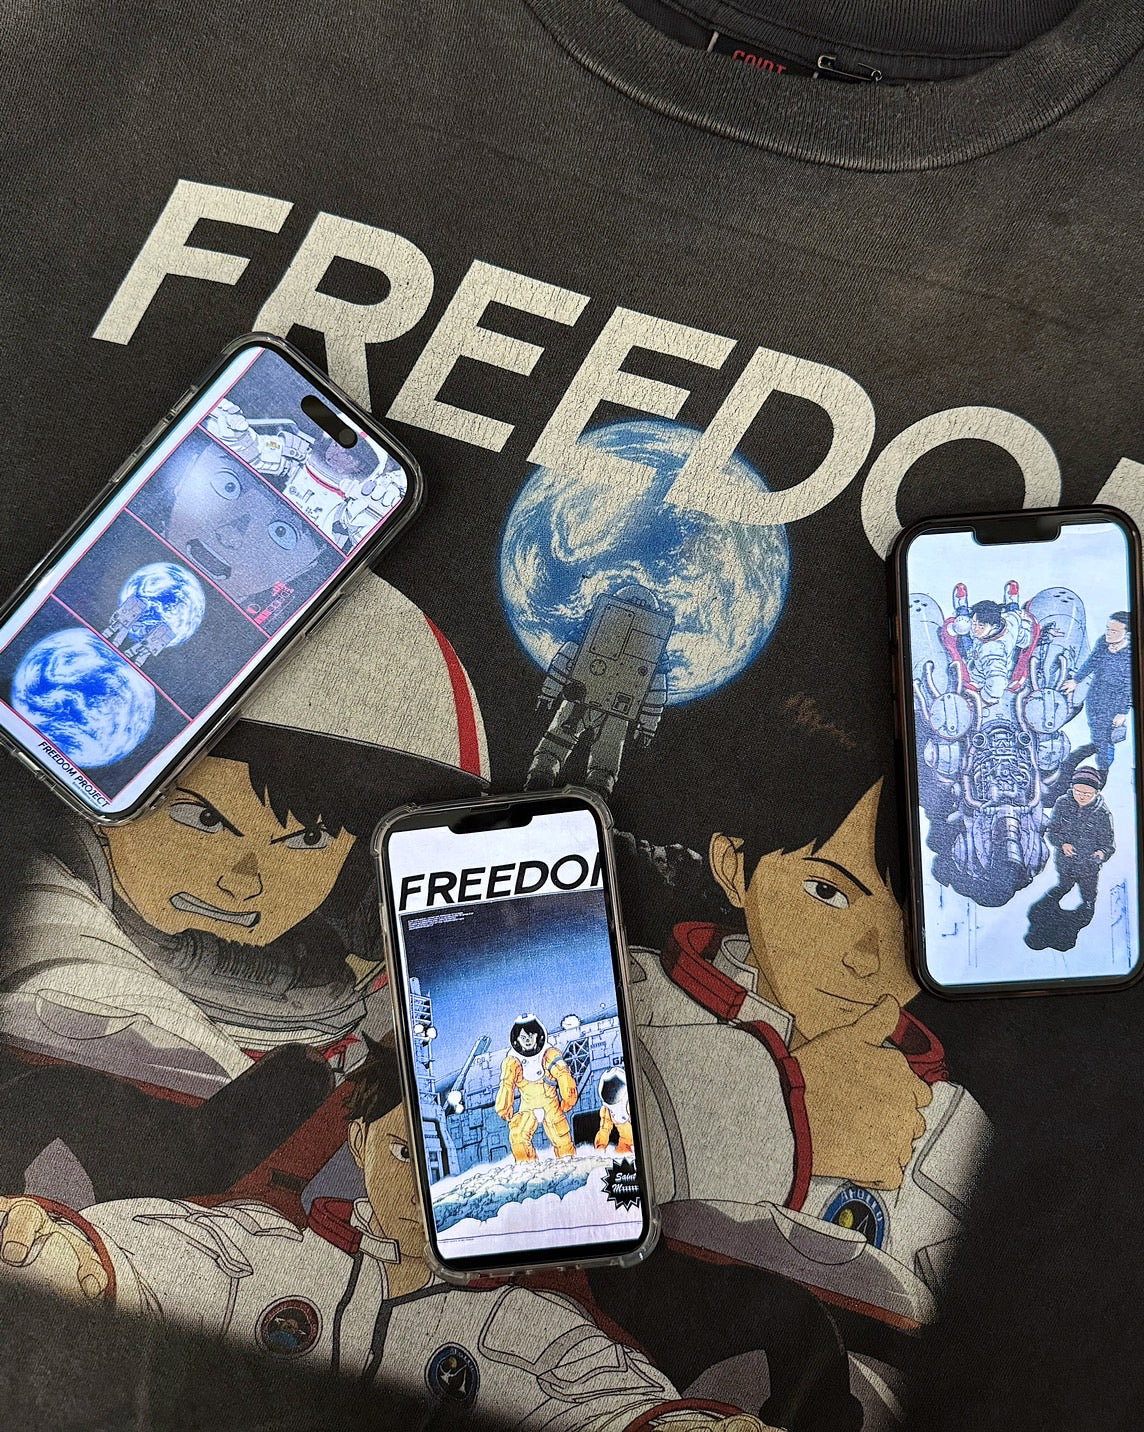 【©SAINT M××××××】<br> Collaboration items including 24SS Drop6 & “FREEDOM” will be released in advance on 4/6 (Sat)!